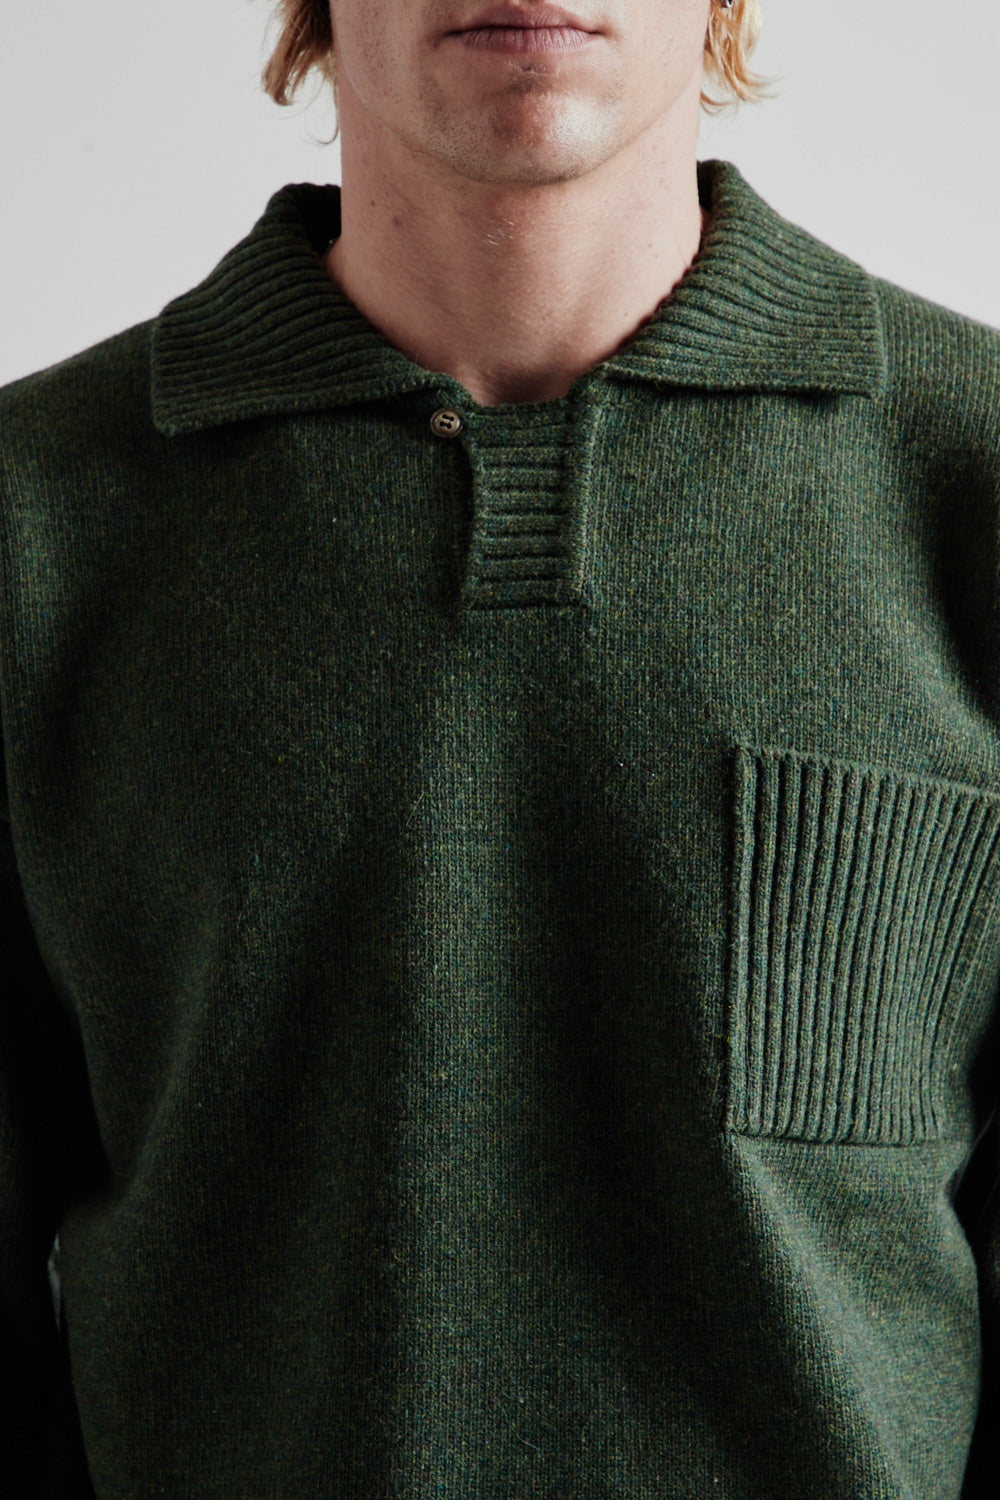 Frizmworks Wool Collar Knit Pullover in Forest Green